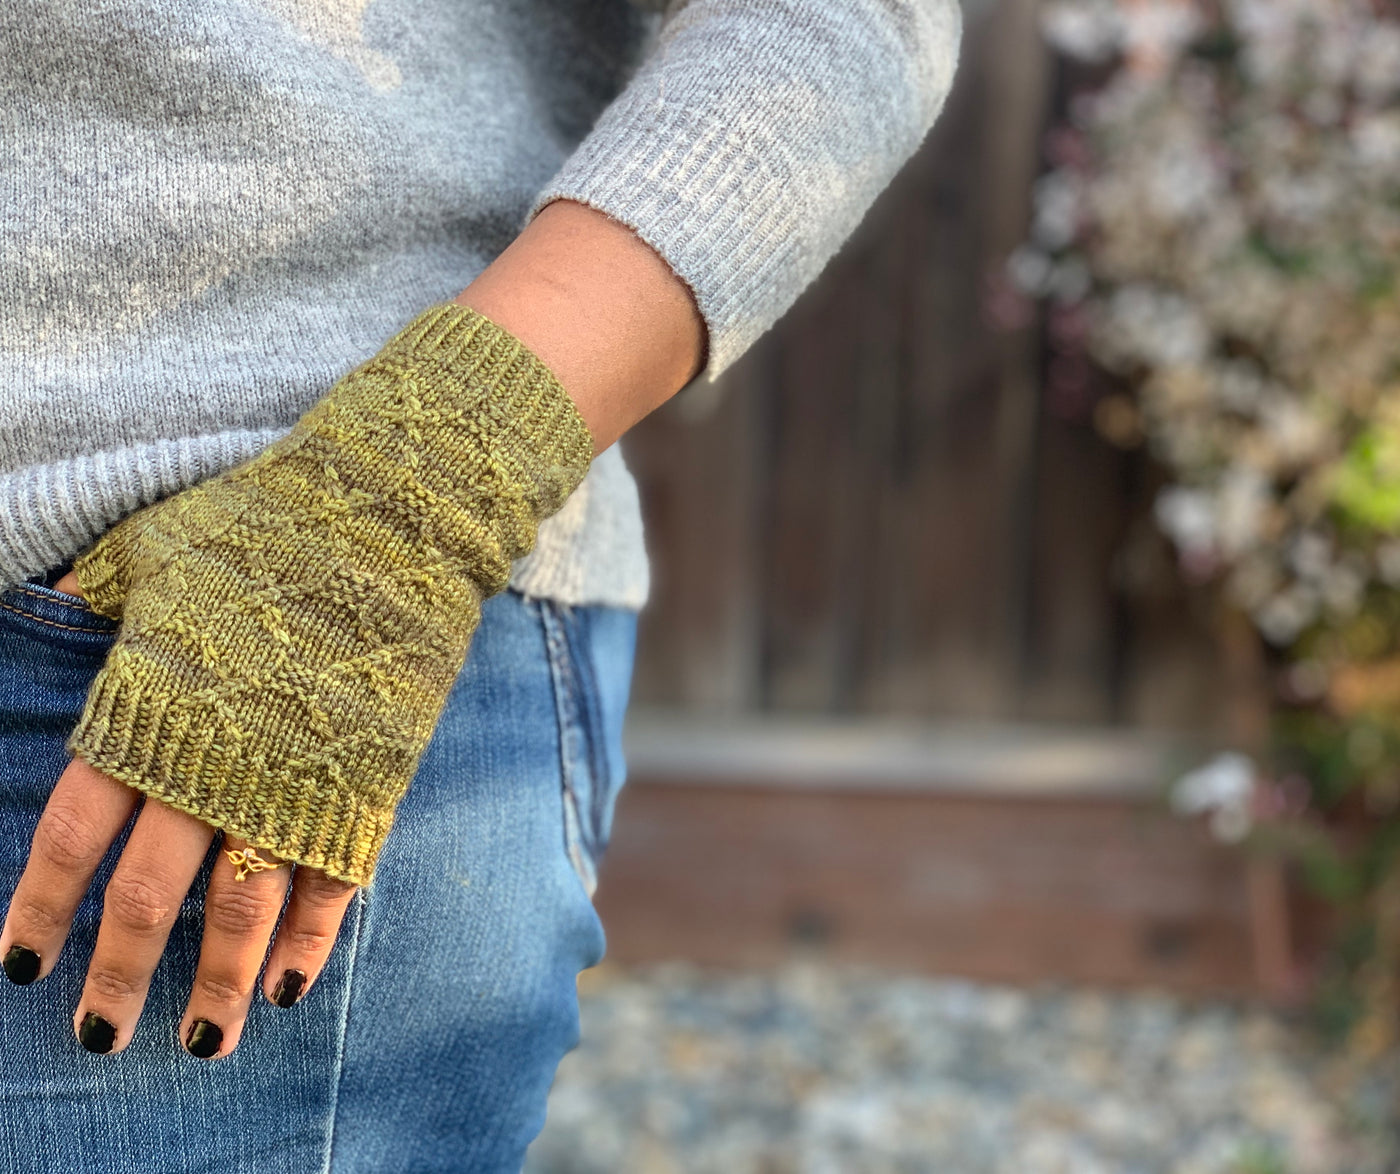 Fingerless Mitts Knit-A-Long with the Designer! 2-Sessions